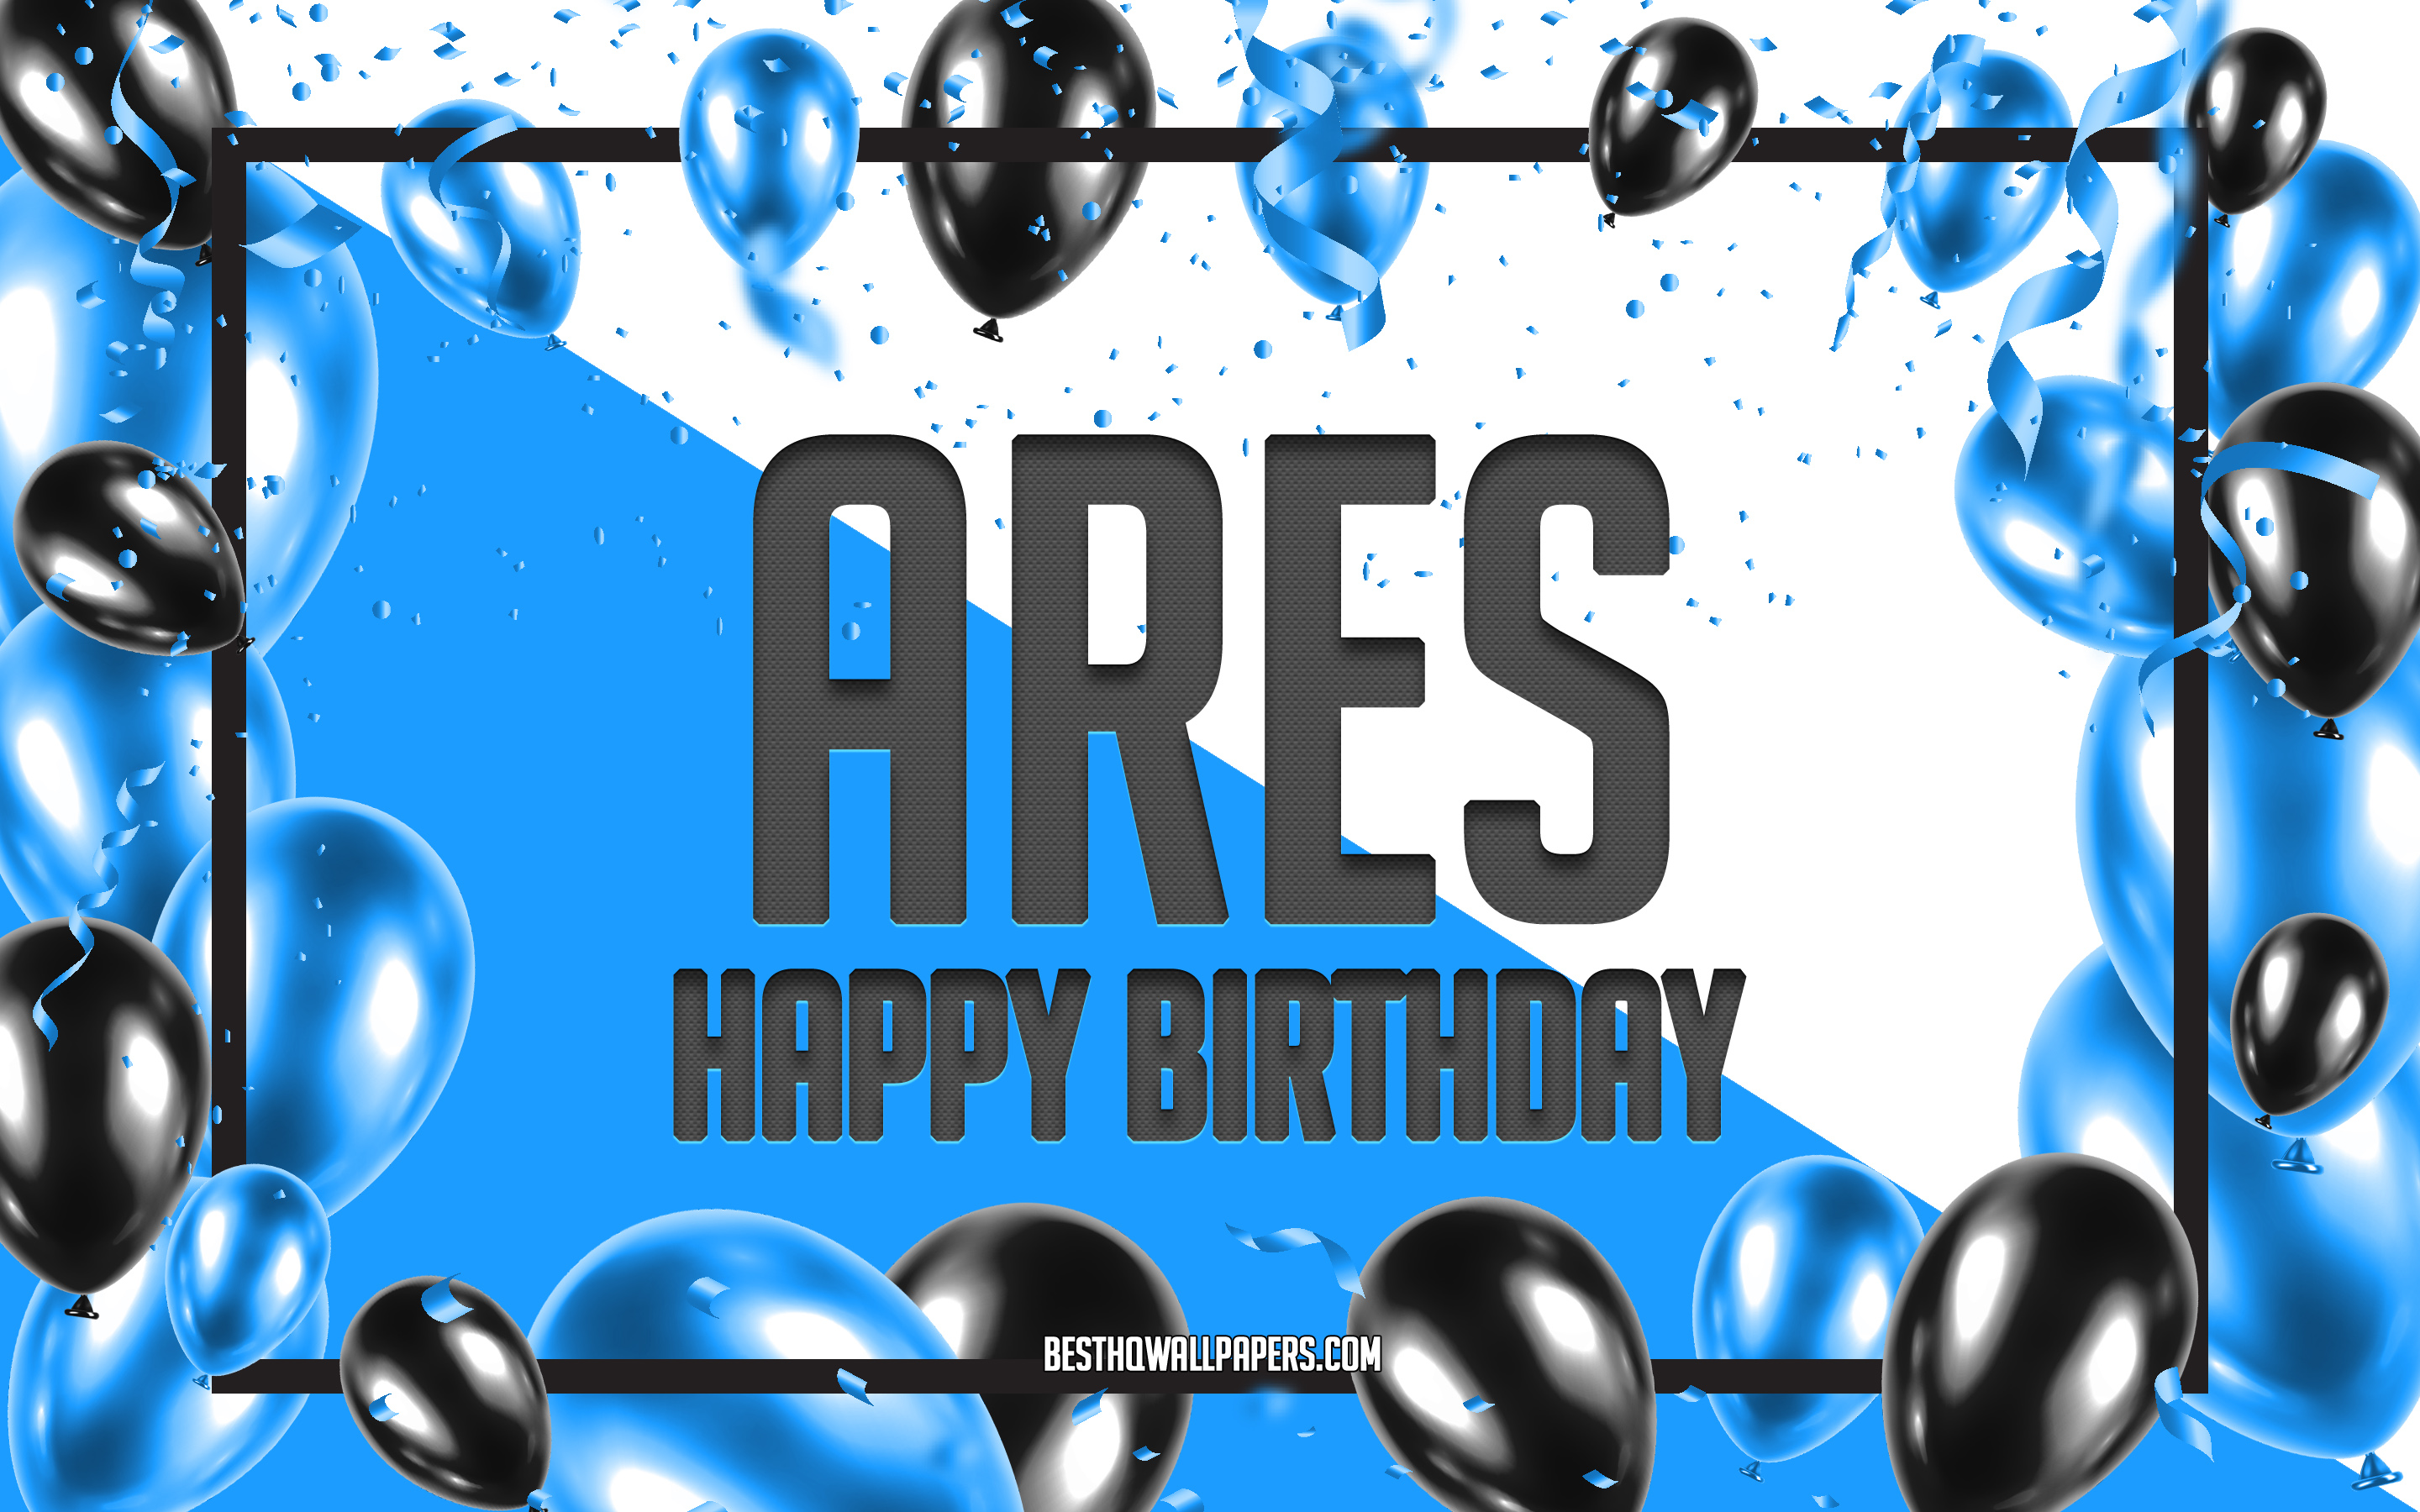 Happy Birthday Ares, Birthday Balloons Background, Ares, wallpapers with na...